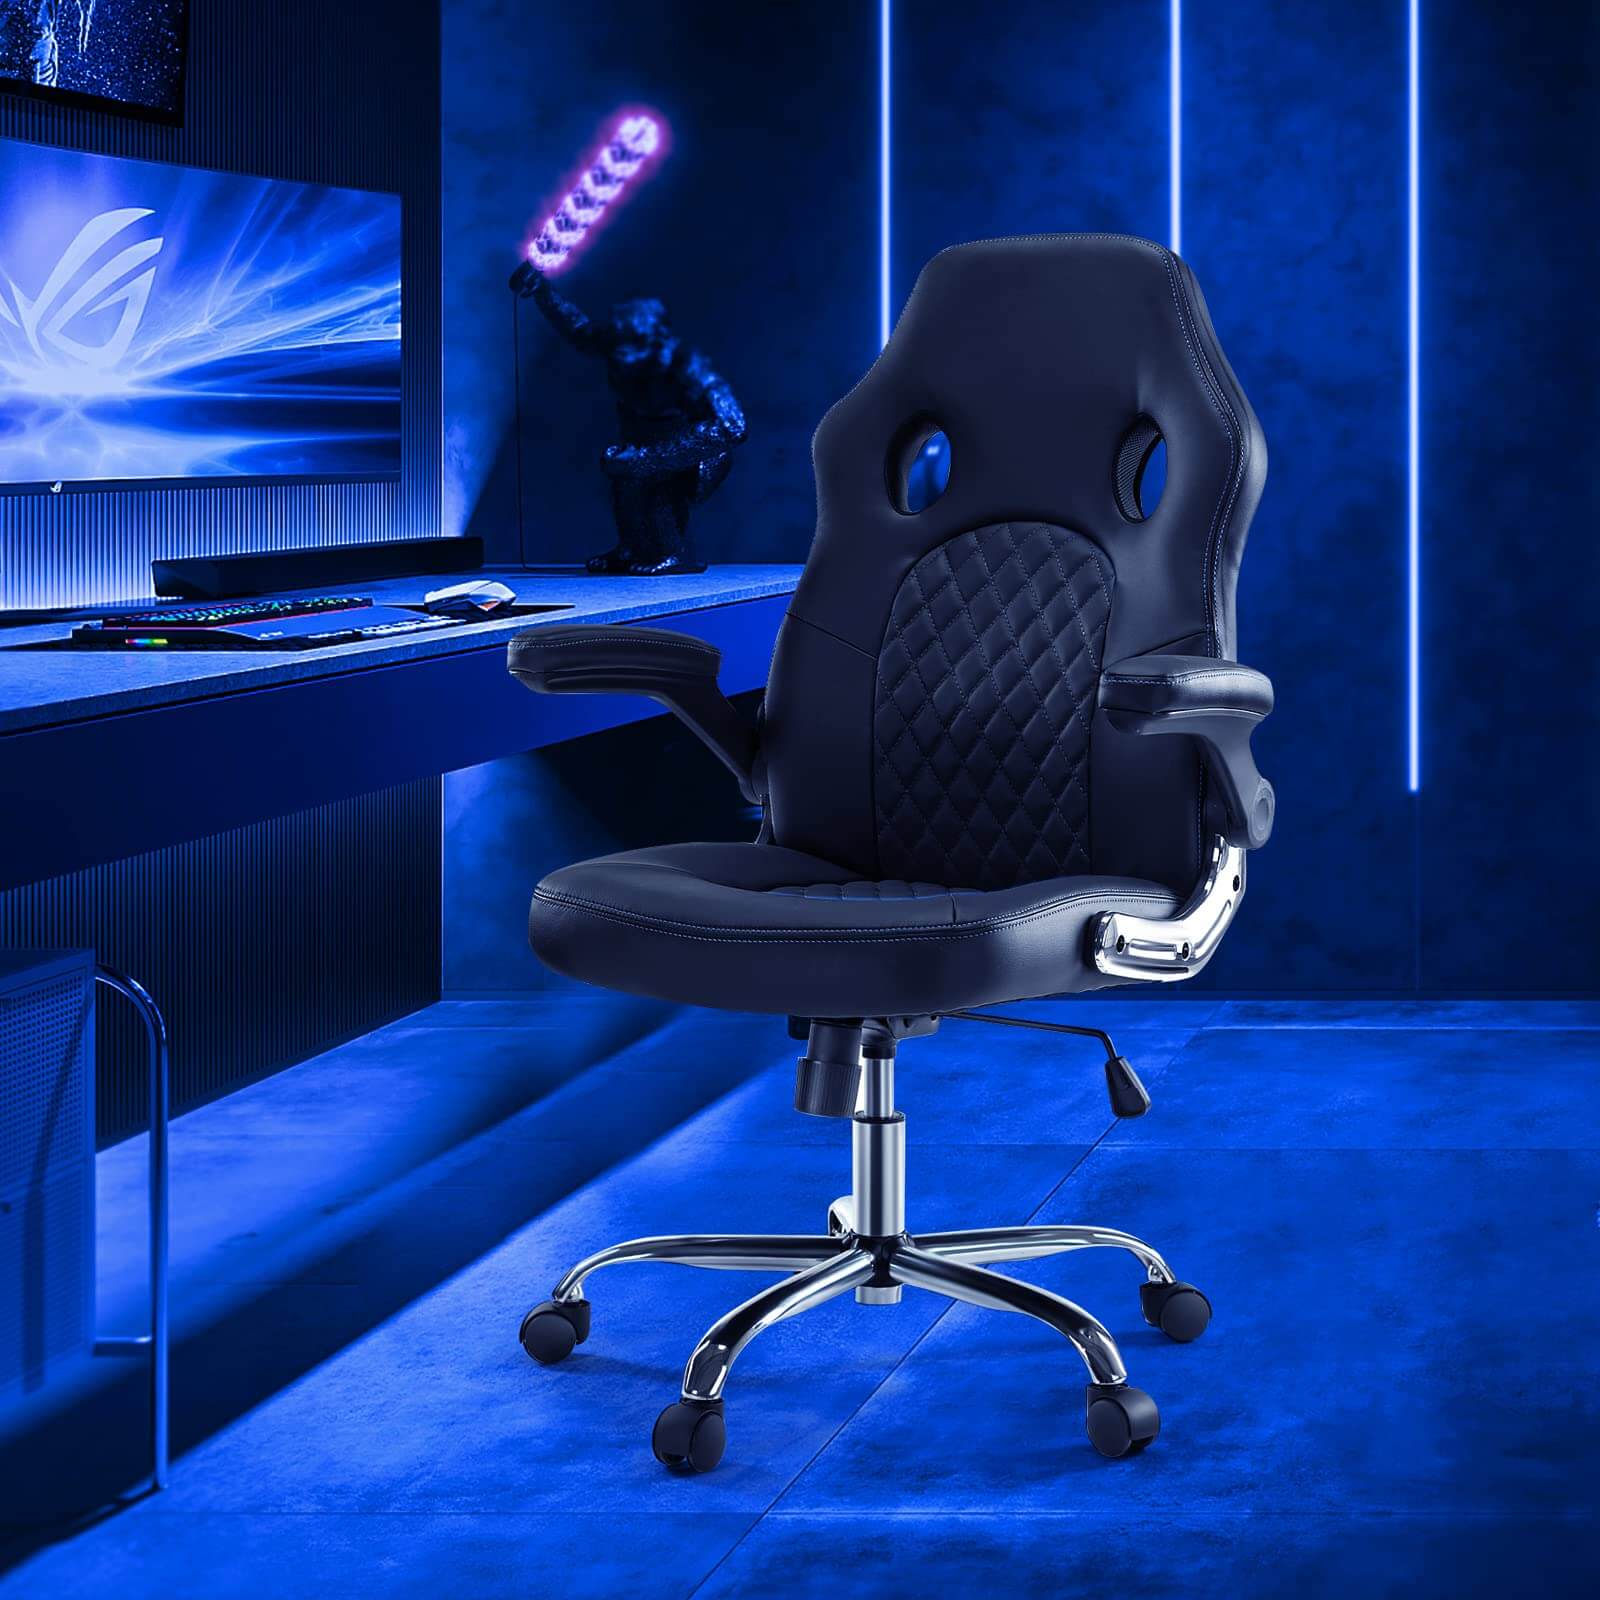 Gaming Chair Adjustable Swivel Computer Chair with Dynamic LED Lights - Blue